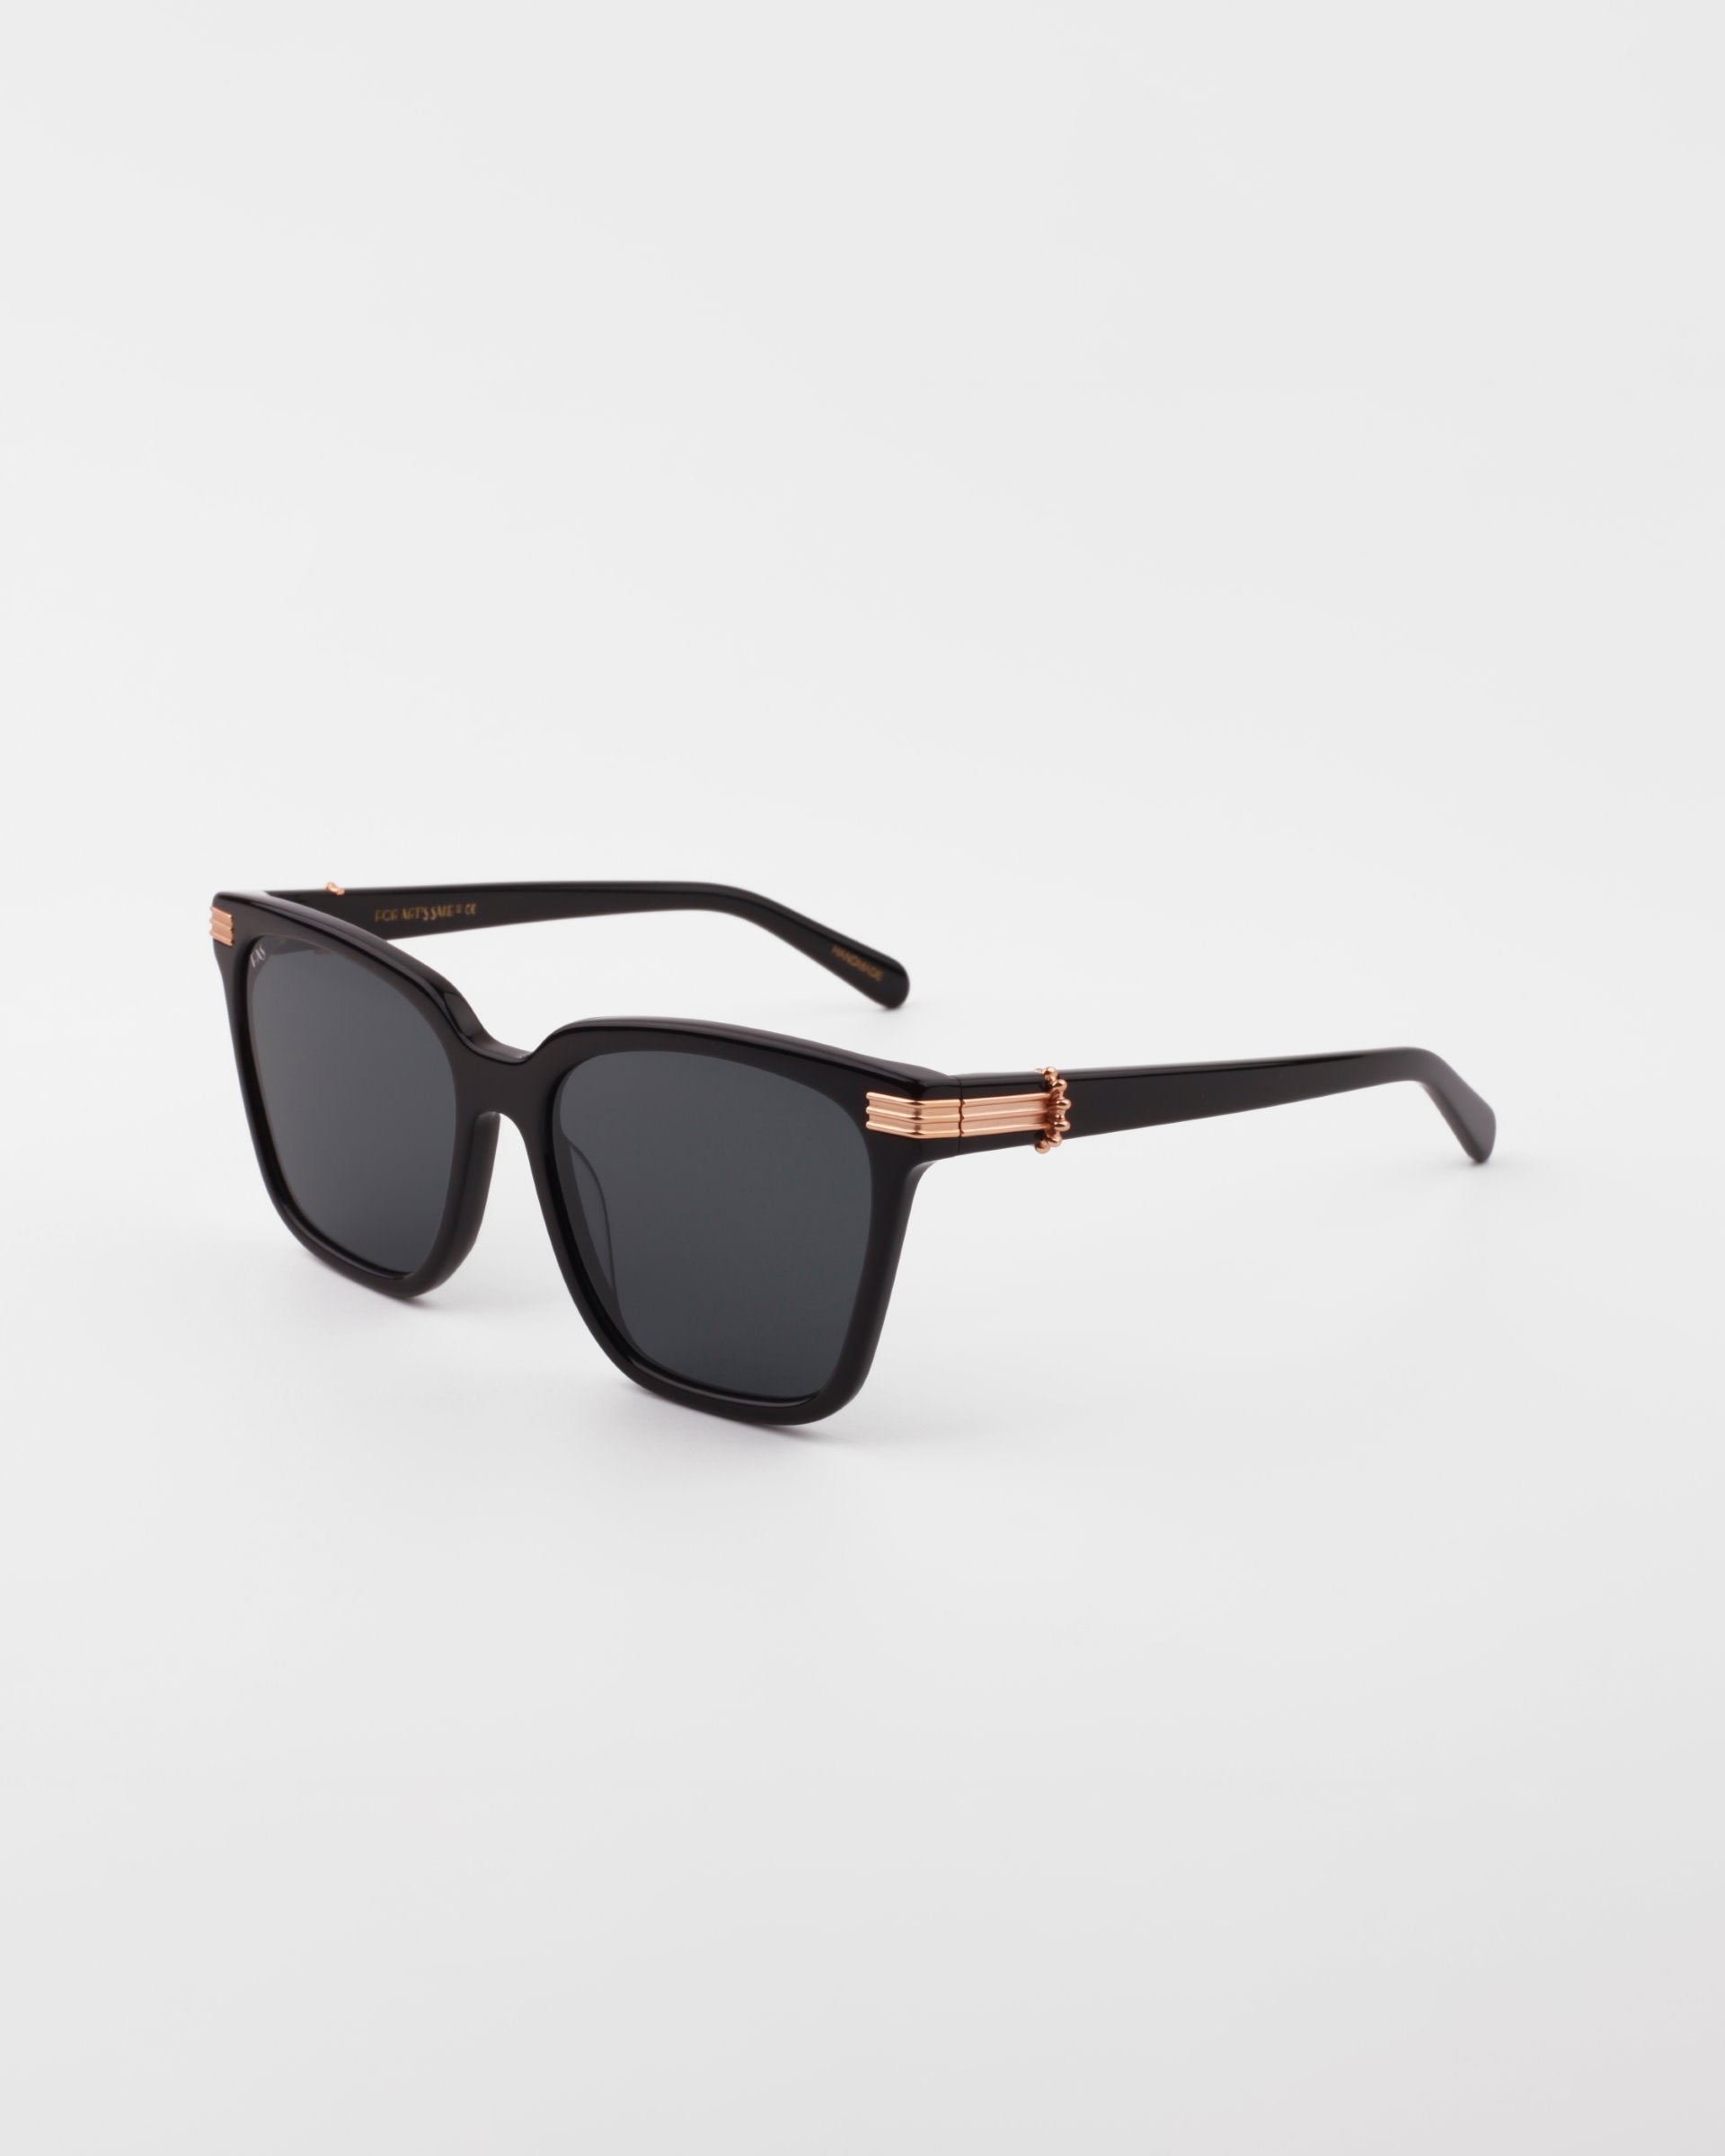 A pair of black rectangular Gaia sunglasses from For Art's Sake® with UV-protected dark lenses and 18-karat gold-plated accents on the temple hinges, set against a plain white background.